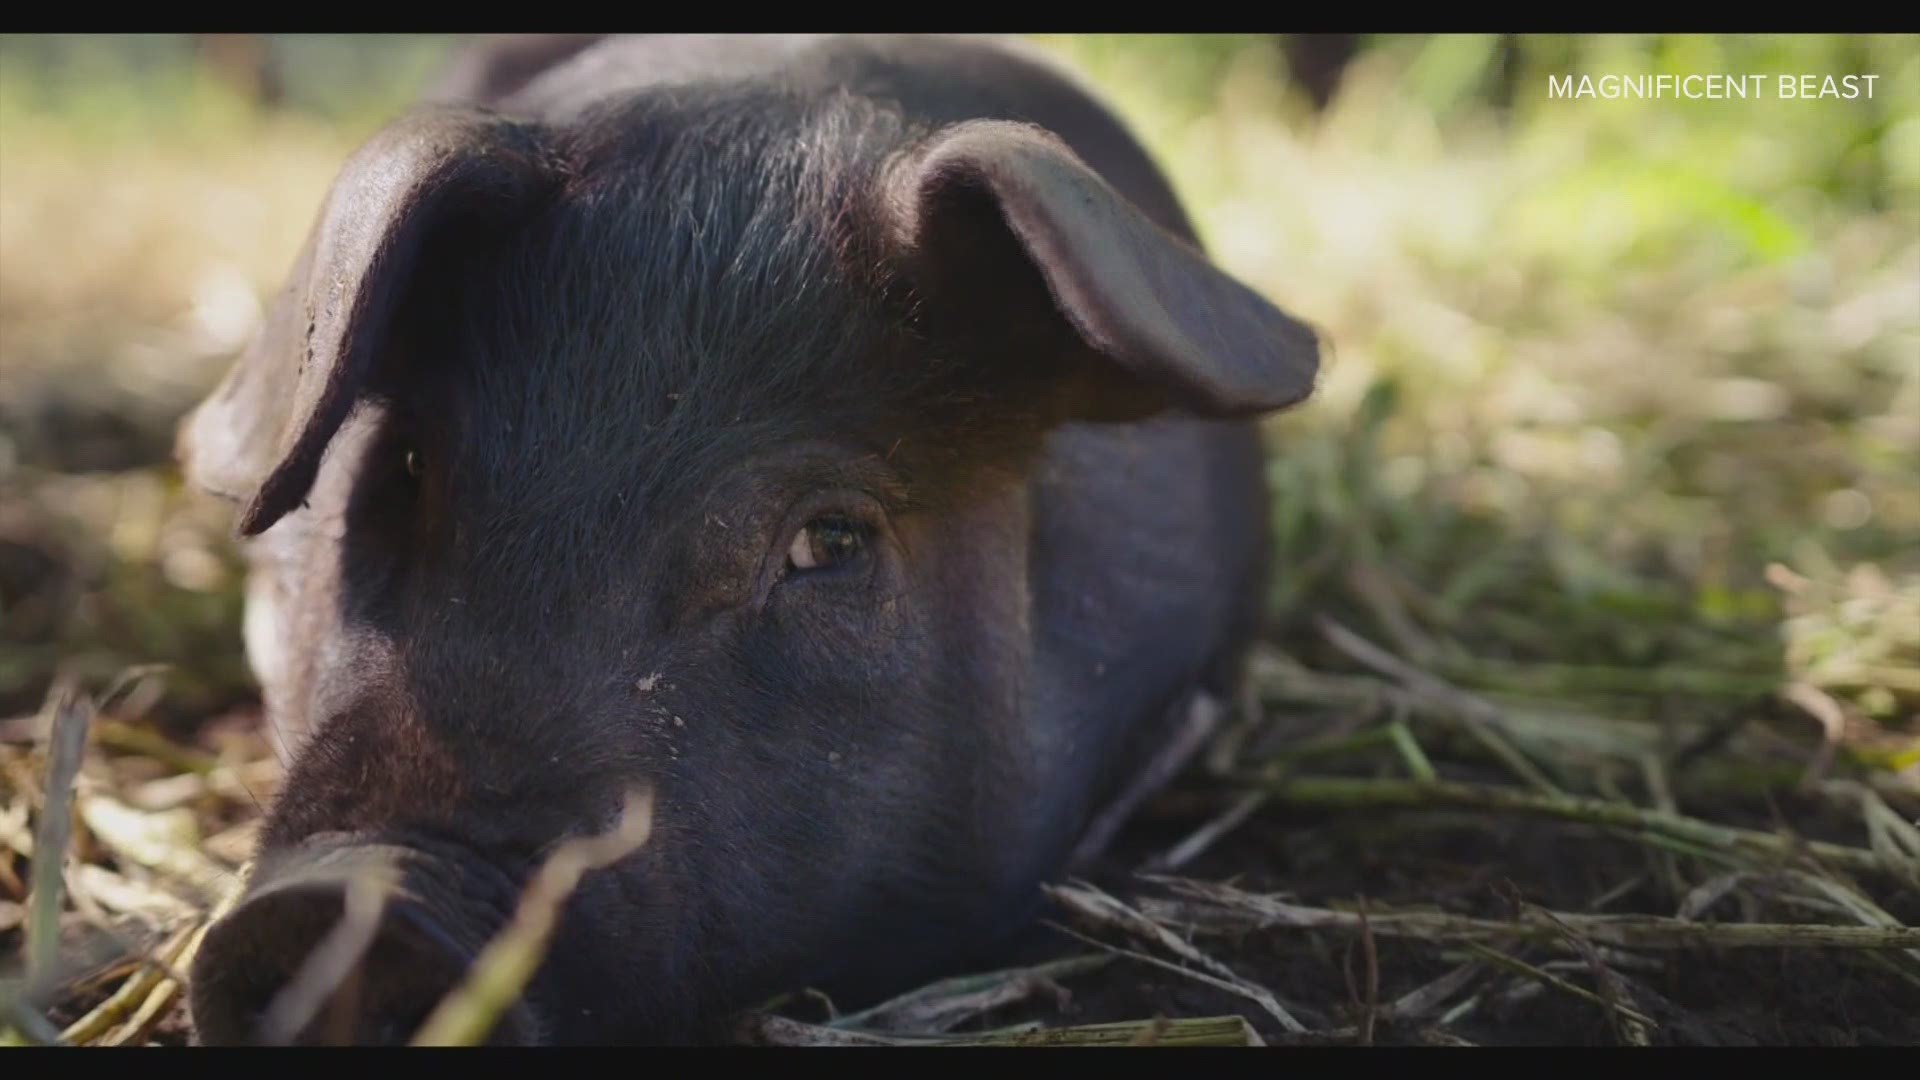 New York Times Bestselling Author Tess Gerritsen and her son Josh made their first documentary exploring why pigs are so loved and yet so hated the world over.